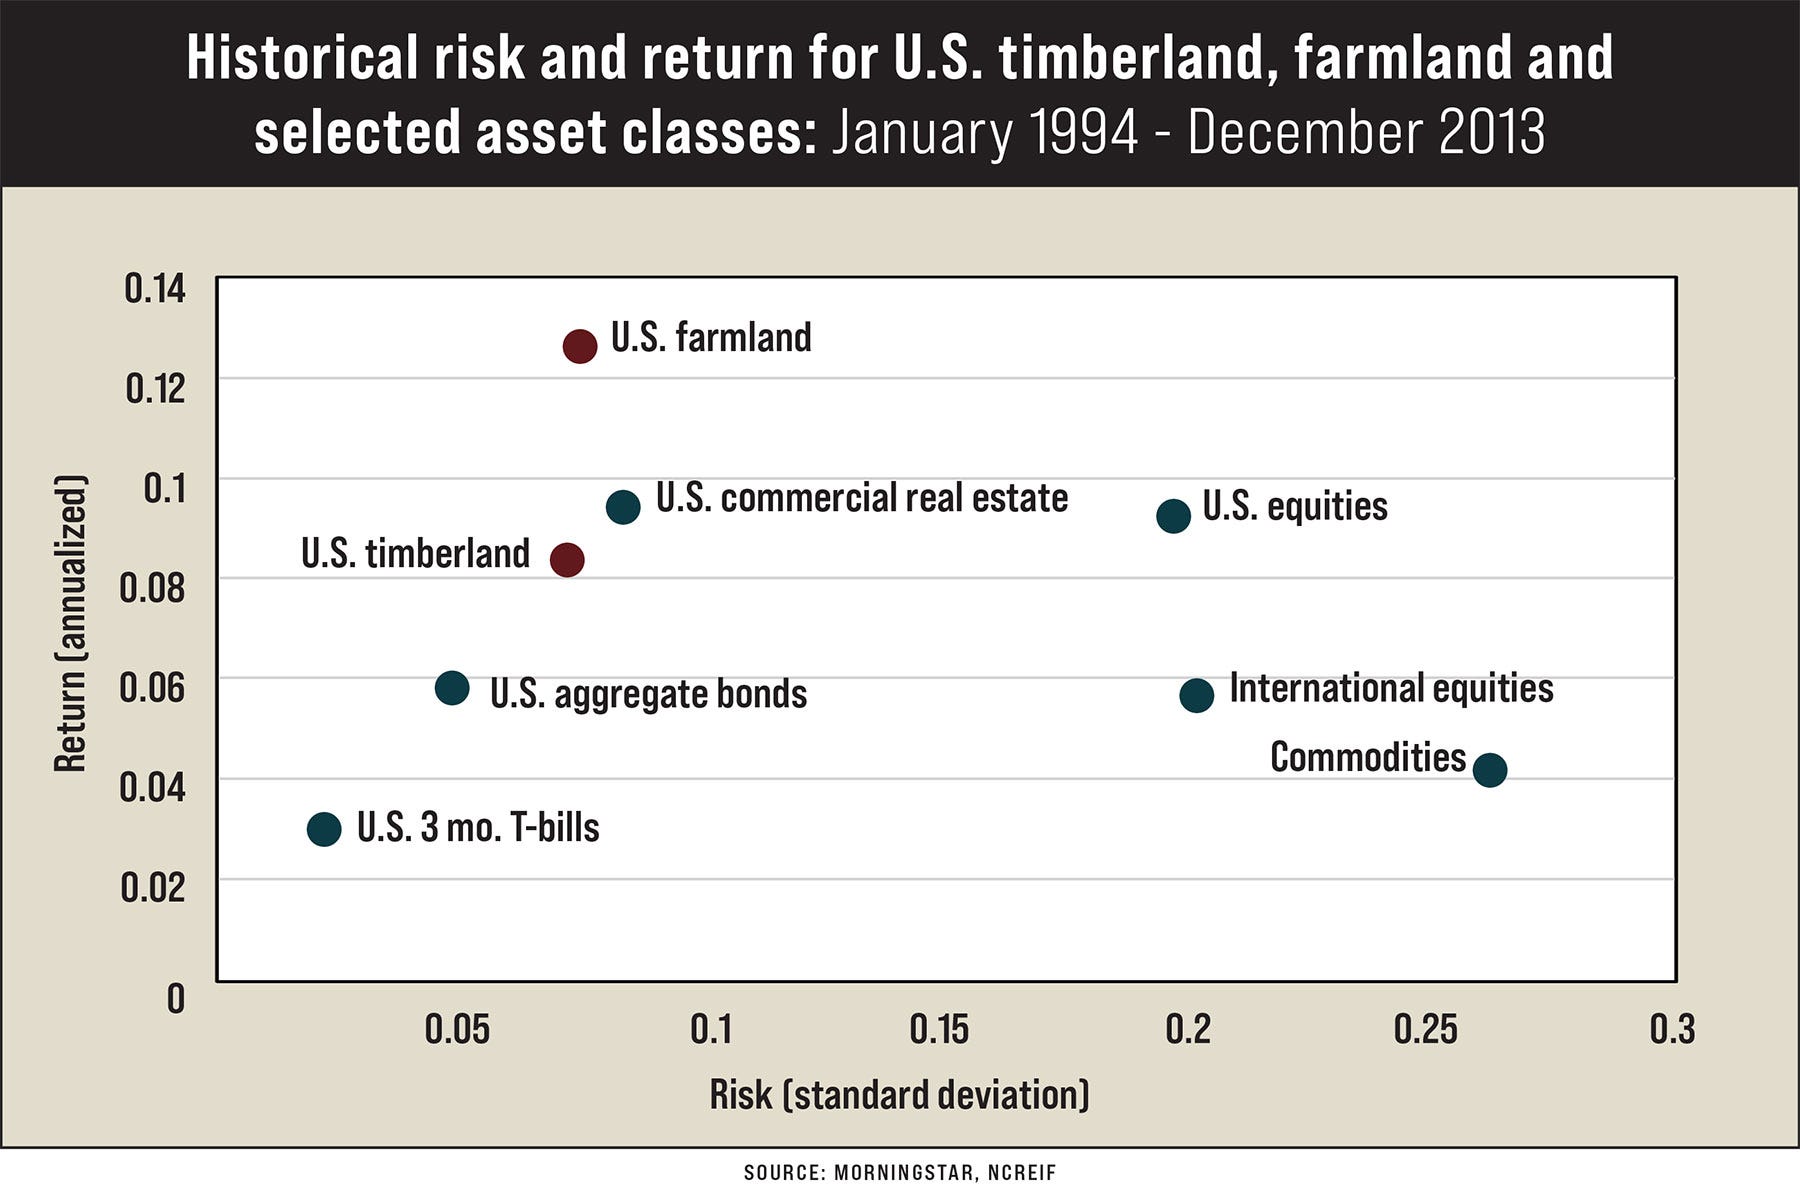 A chart illustrating the historical risk and return for U.S. timberland, farmland and selected asset classes from January 1994 to December 2013